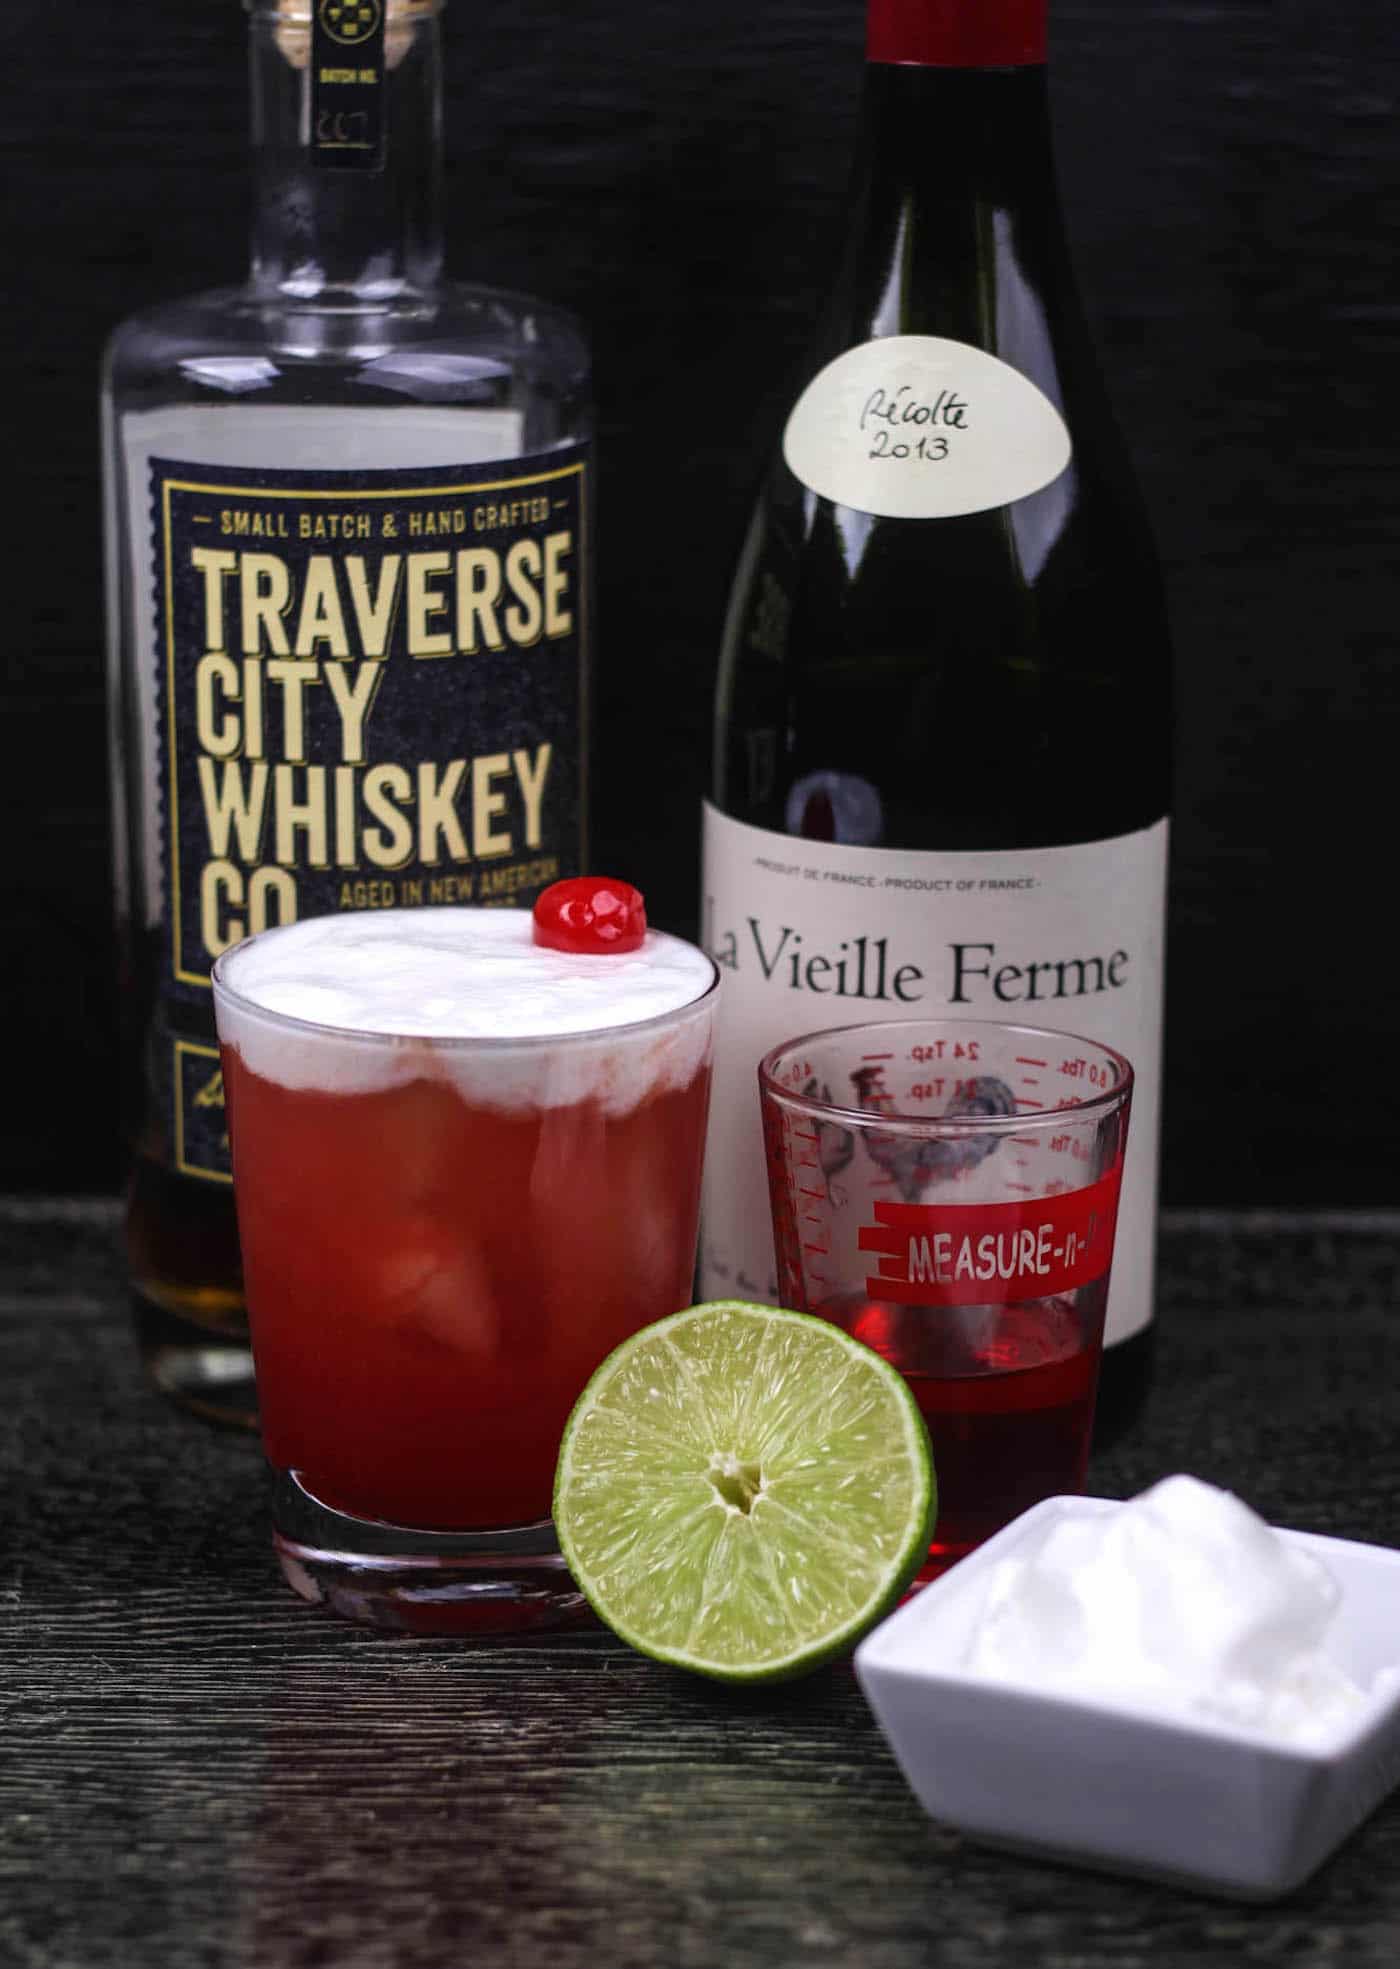 Bottle of Traverse City whiskey, cherry cocktail, and lime